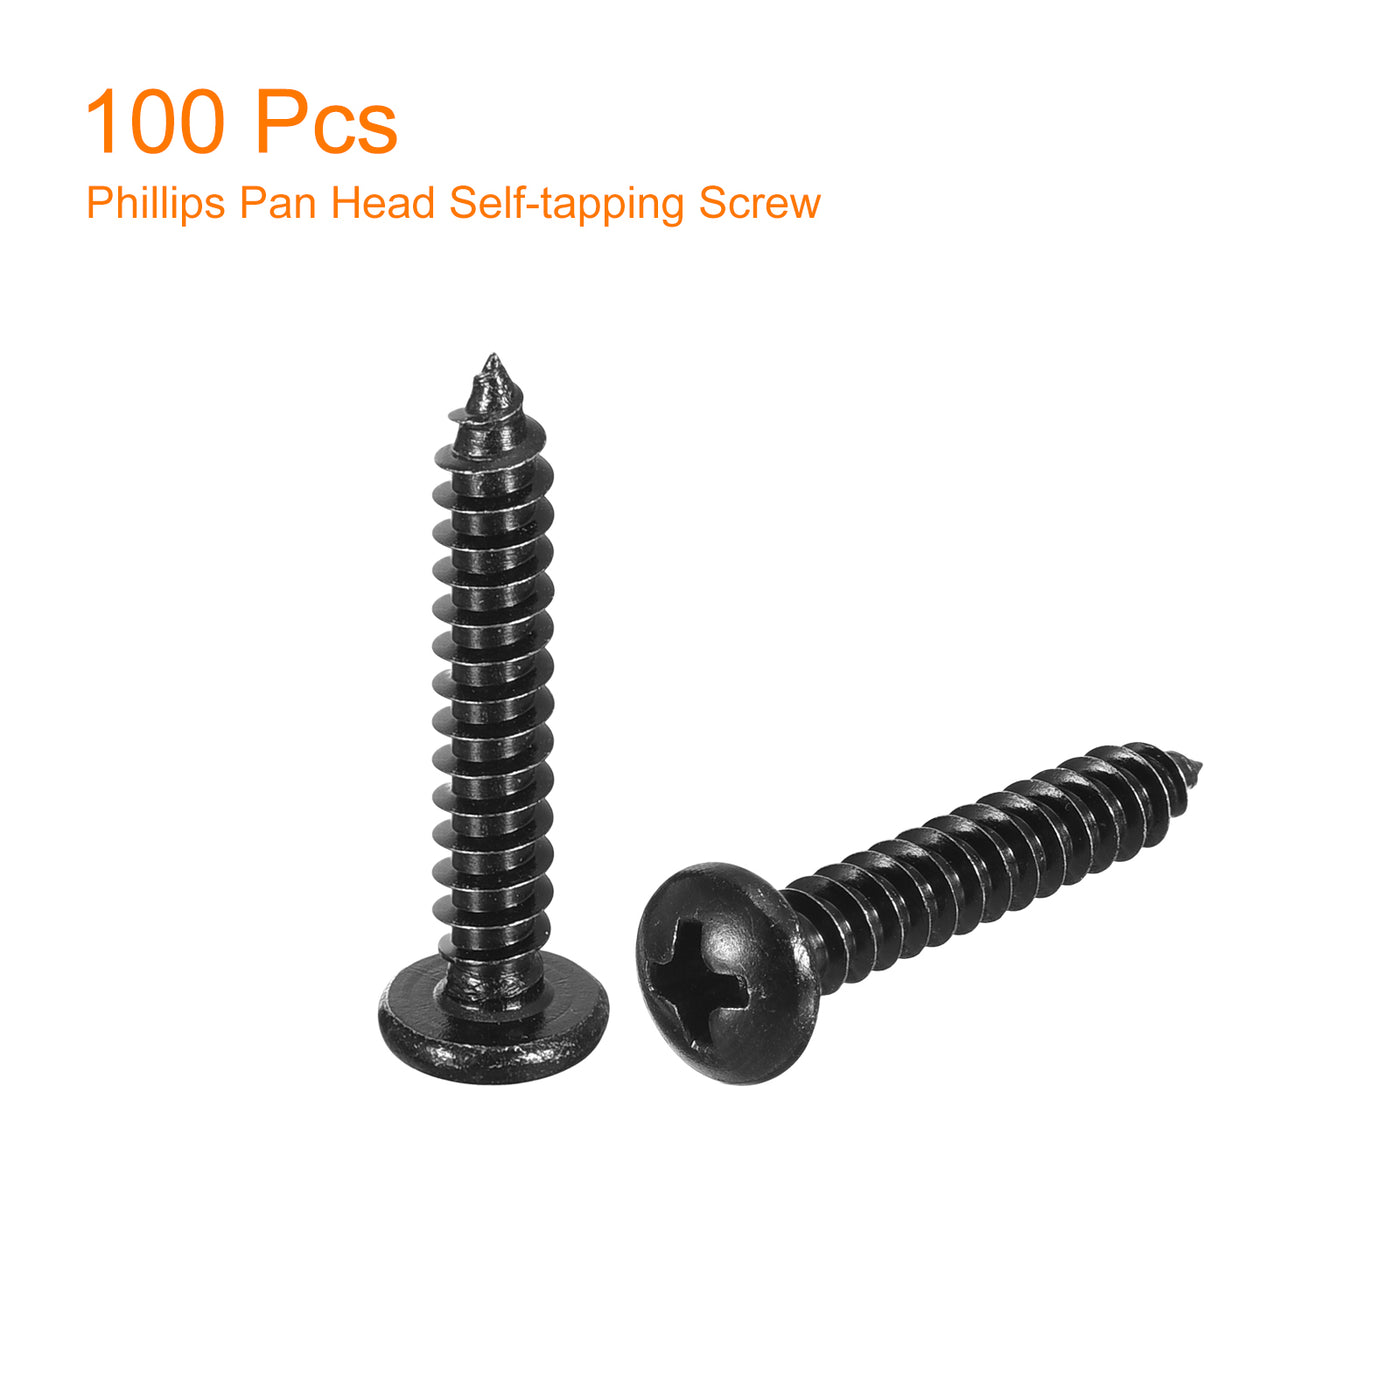 uxcell Uxcell 4mm x 25mm Phillips Pan Head Self-tapping Screw, 100pcs - 304 Stainless Steel Round Head Wood Screw Full Thread (Black)